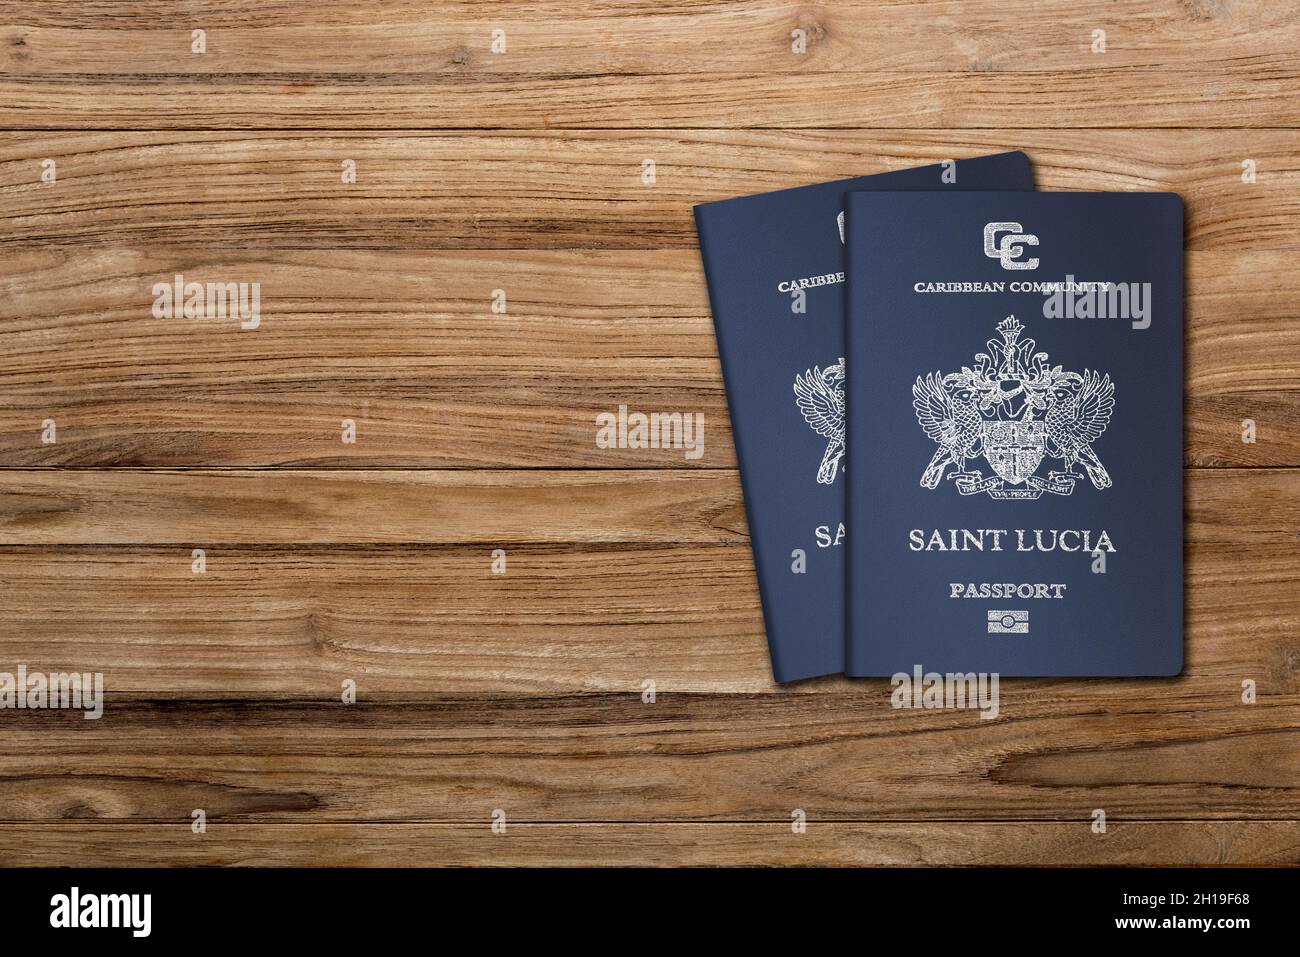 Saint Lucia passport, British Commonwealth country, Caribbean country, citizenship by investment Stock Photo